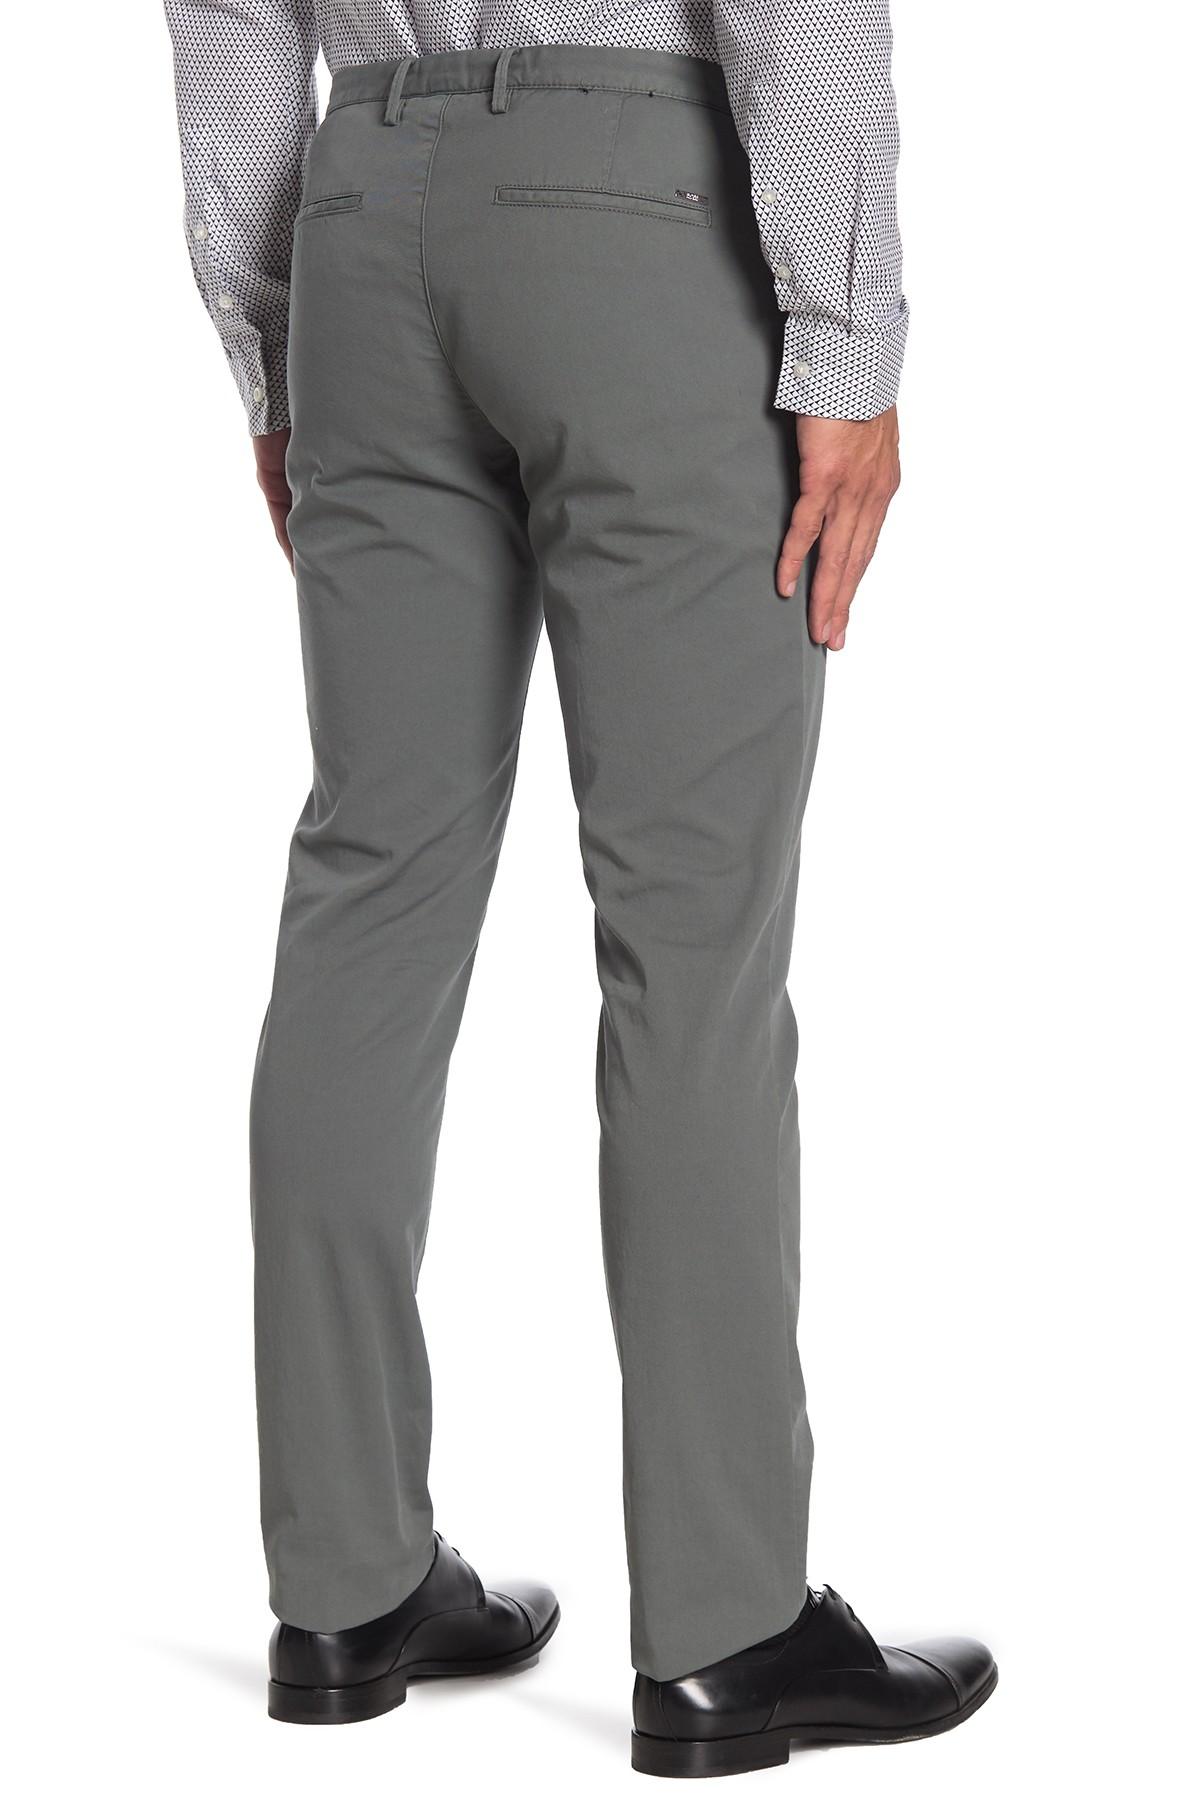 BOSS Cotton Rice Cargo Pants in Gray for Men - Lyst